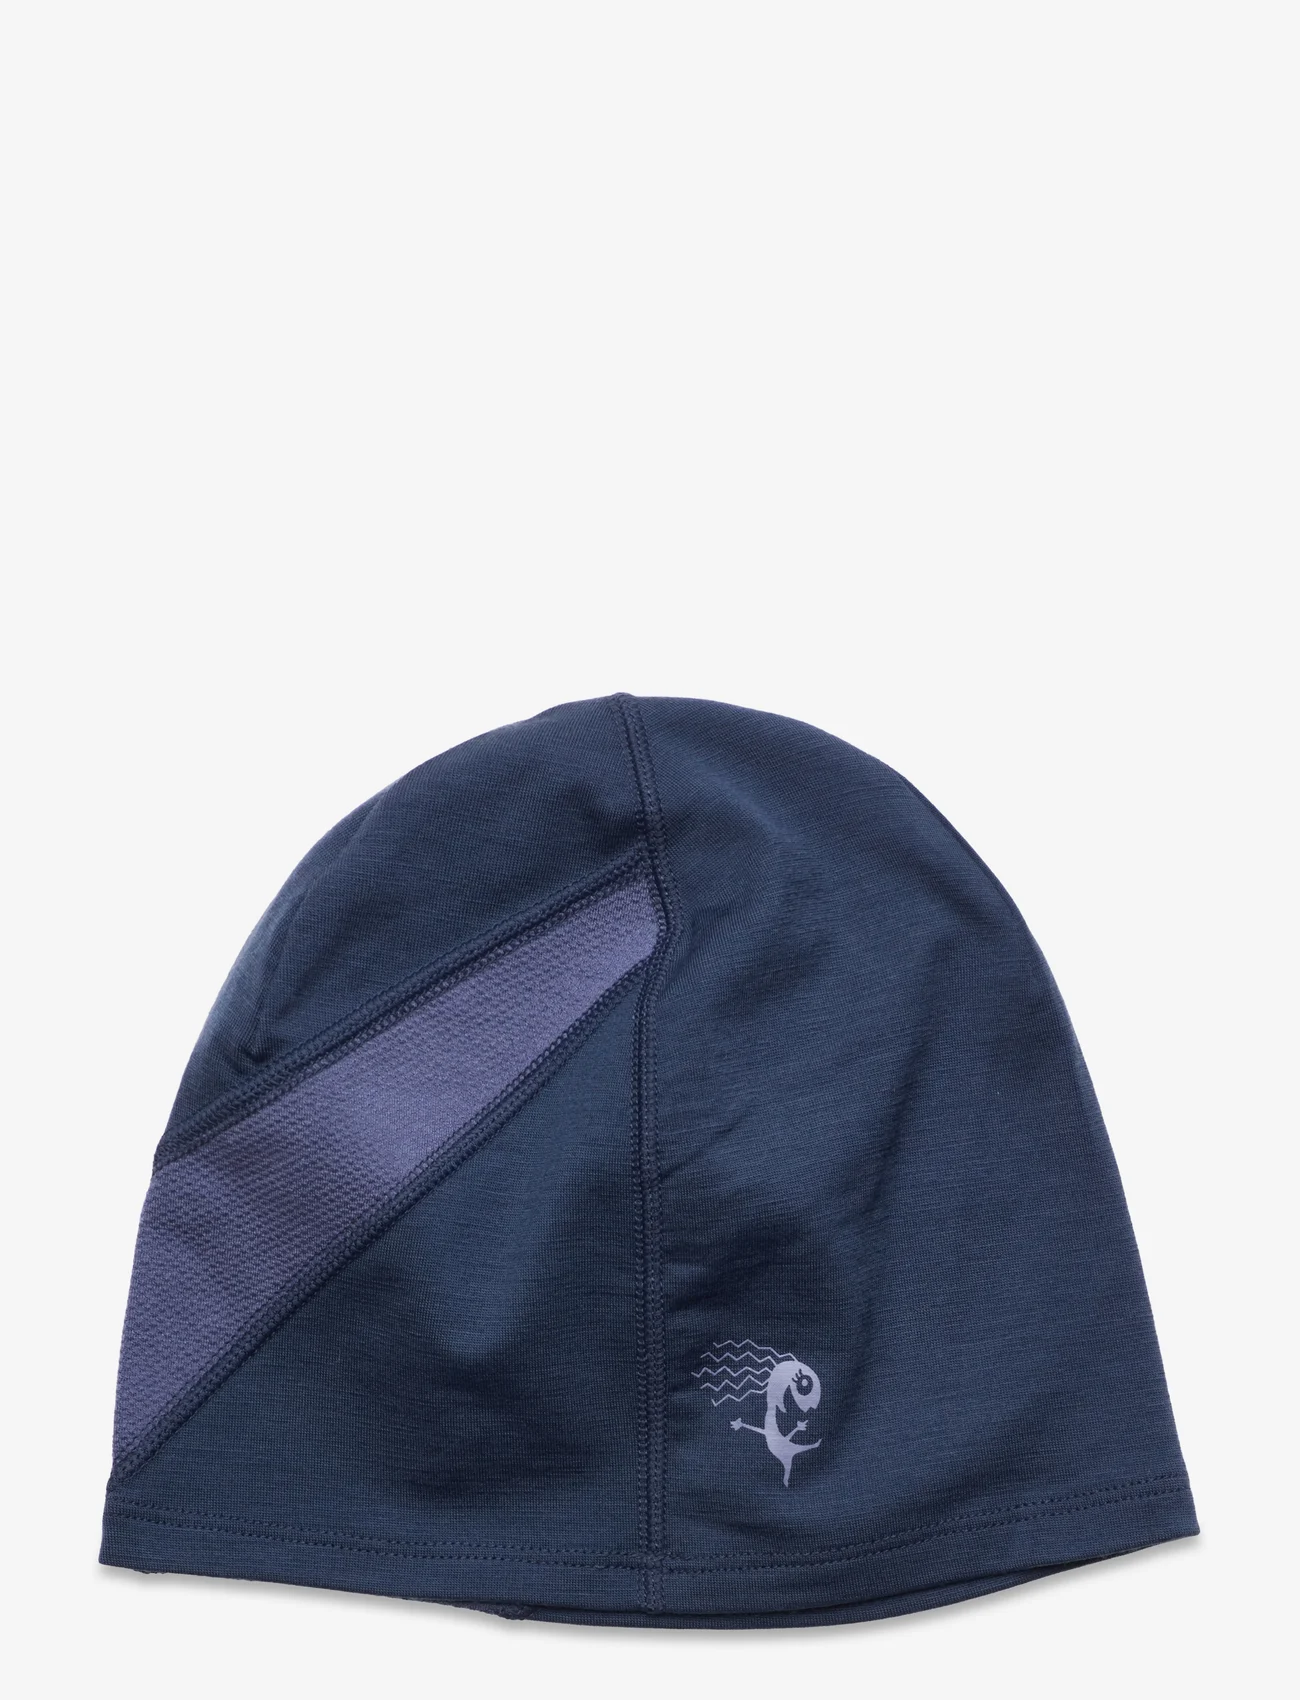 Bergans - Cecilie Light Wool Beanie Orion Blue/Misty Forest 58 - lowest prices - thunderblue/lt thunderblue - 1